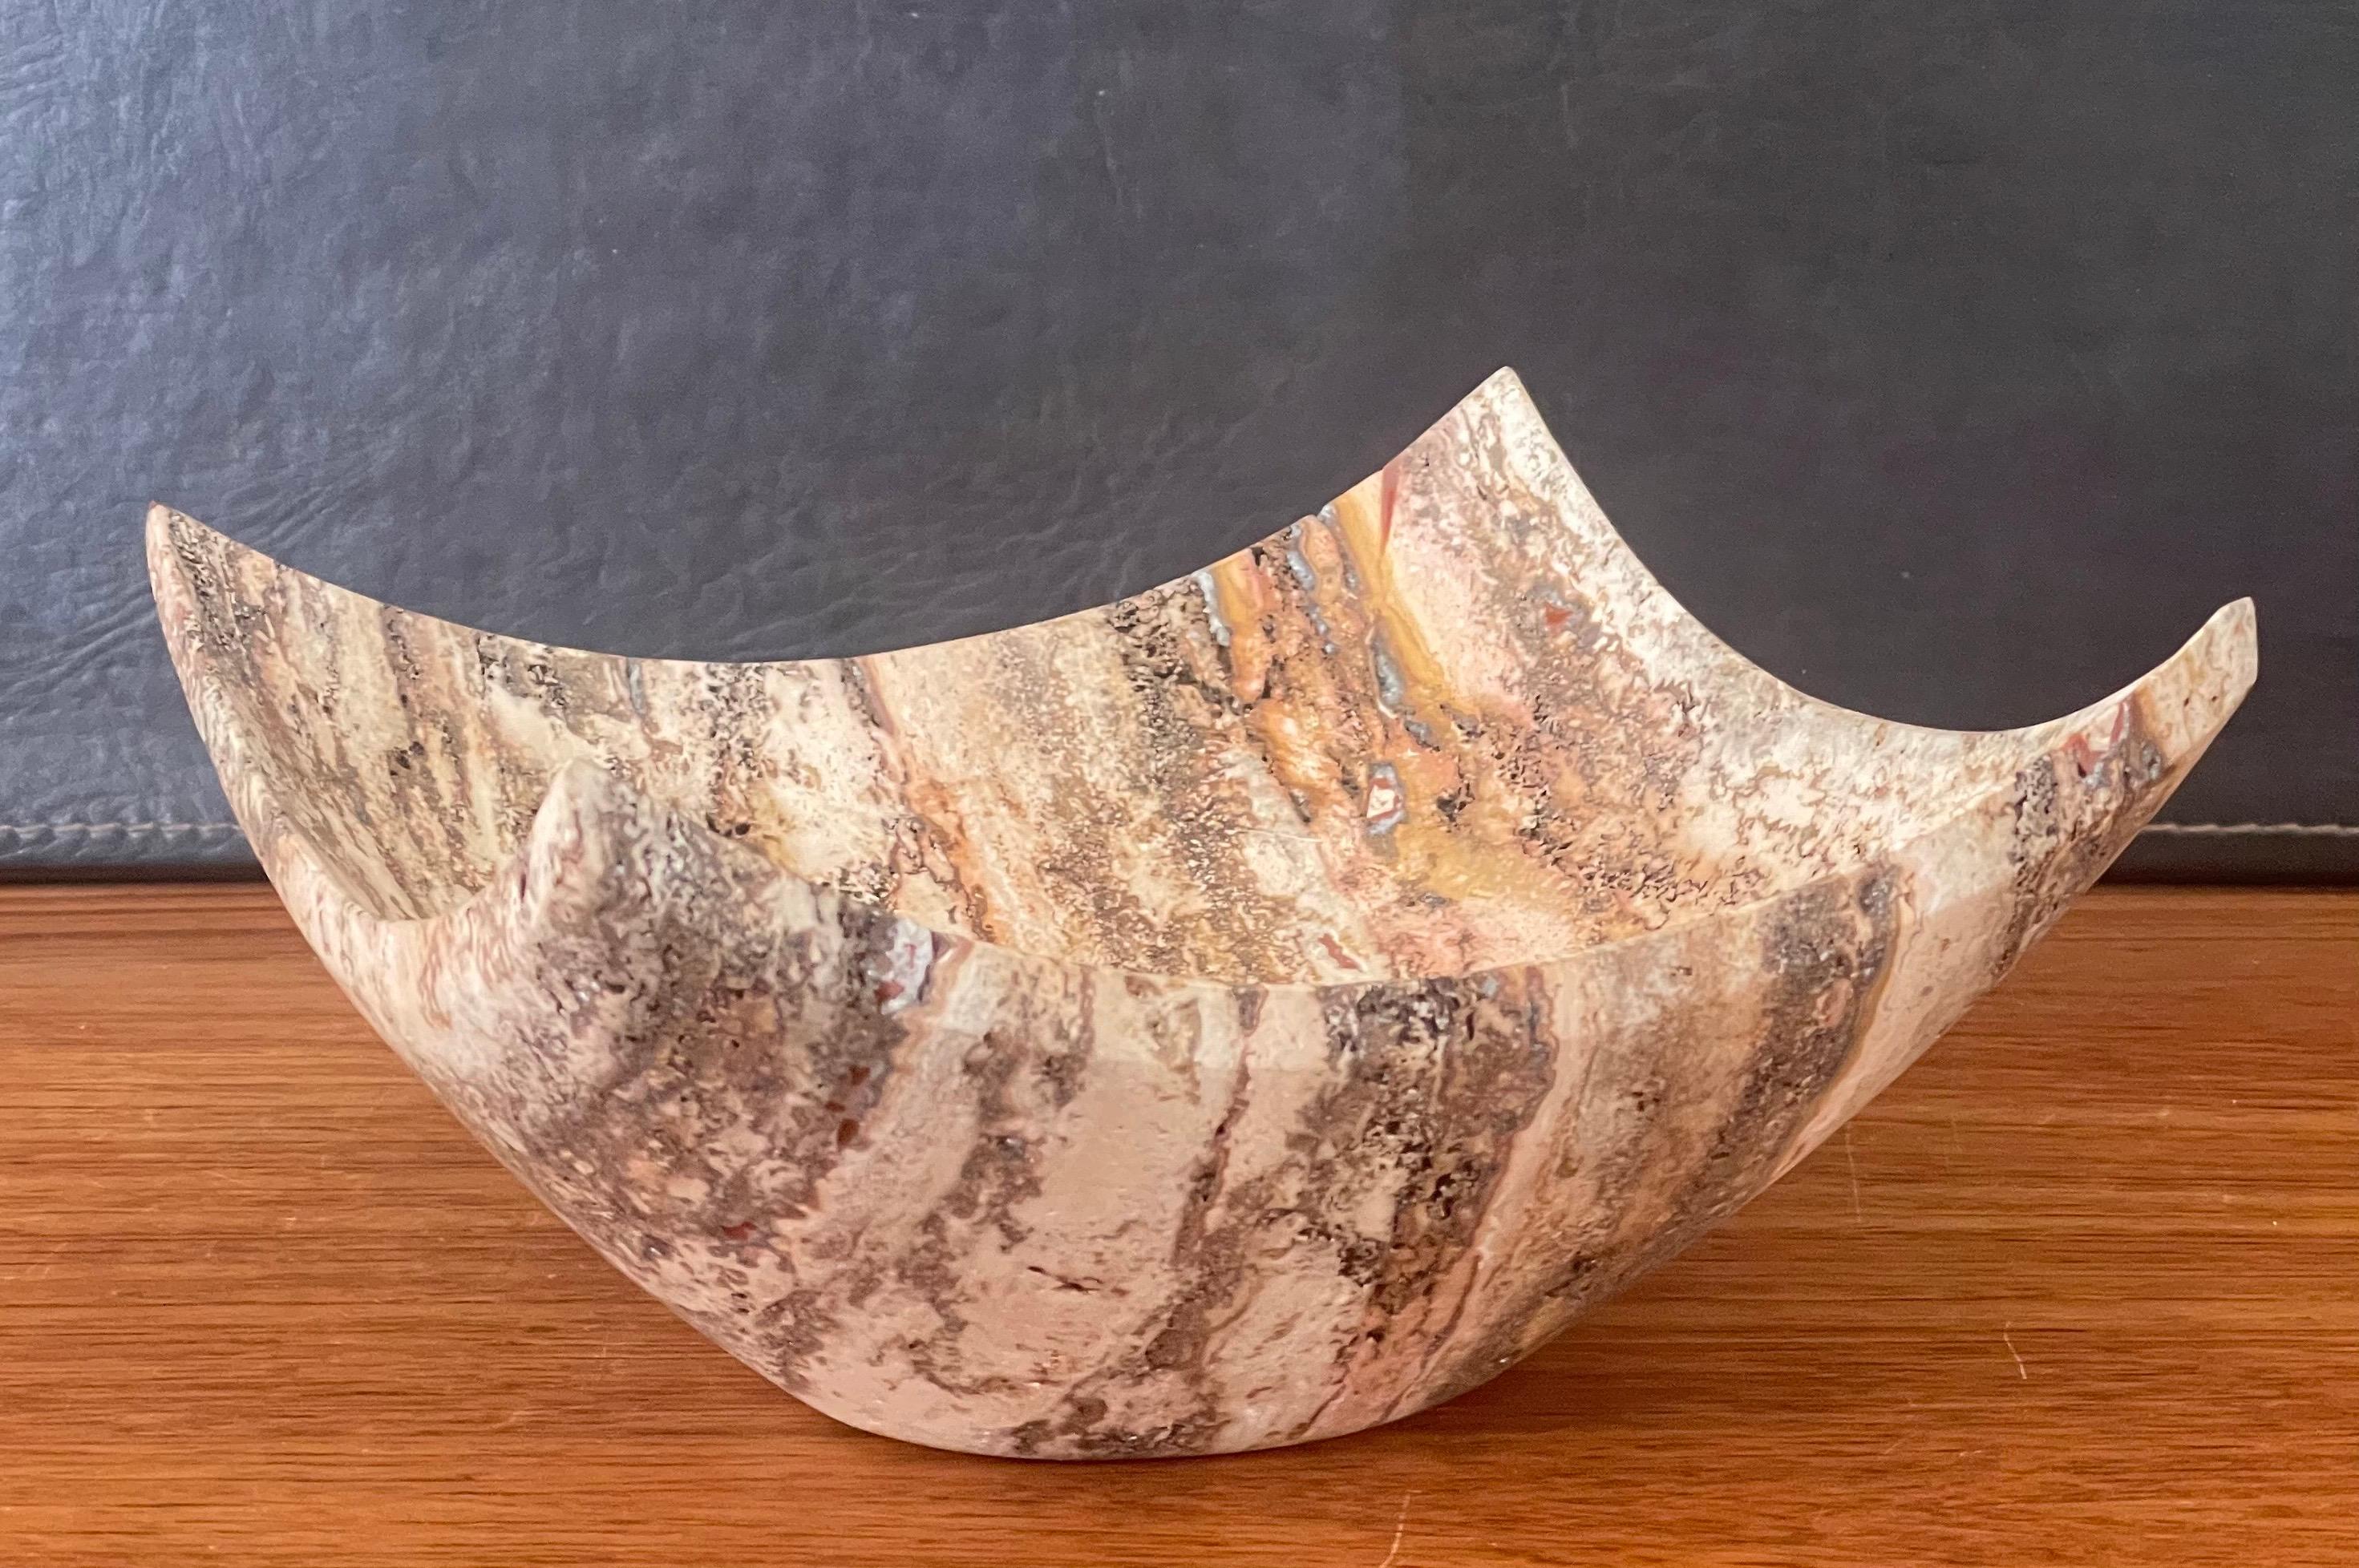 A very stylish Italian travertine bowl, circa 1990s. The bowl is in very good vintage condition and measures 8